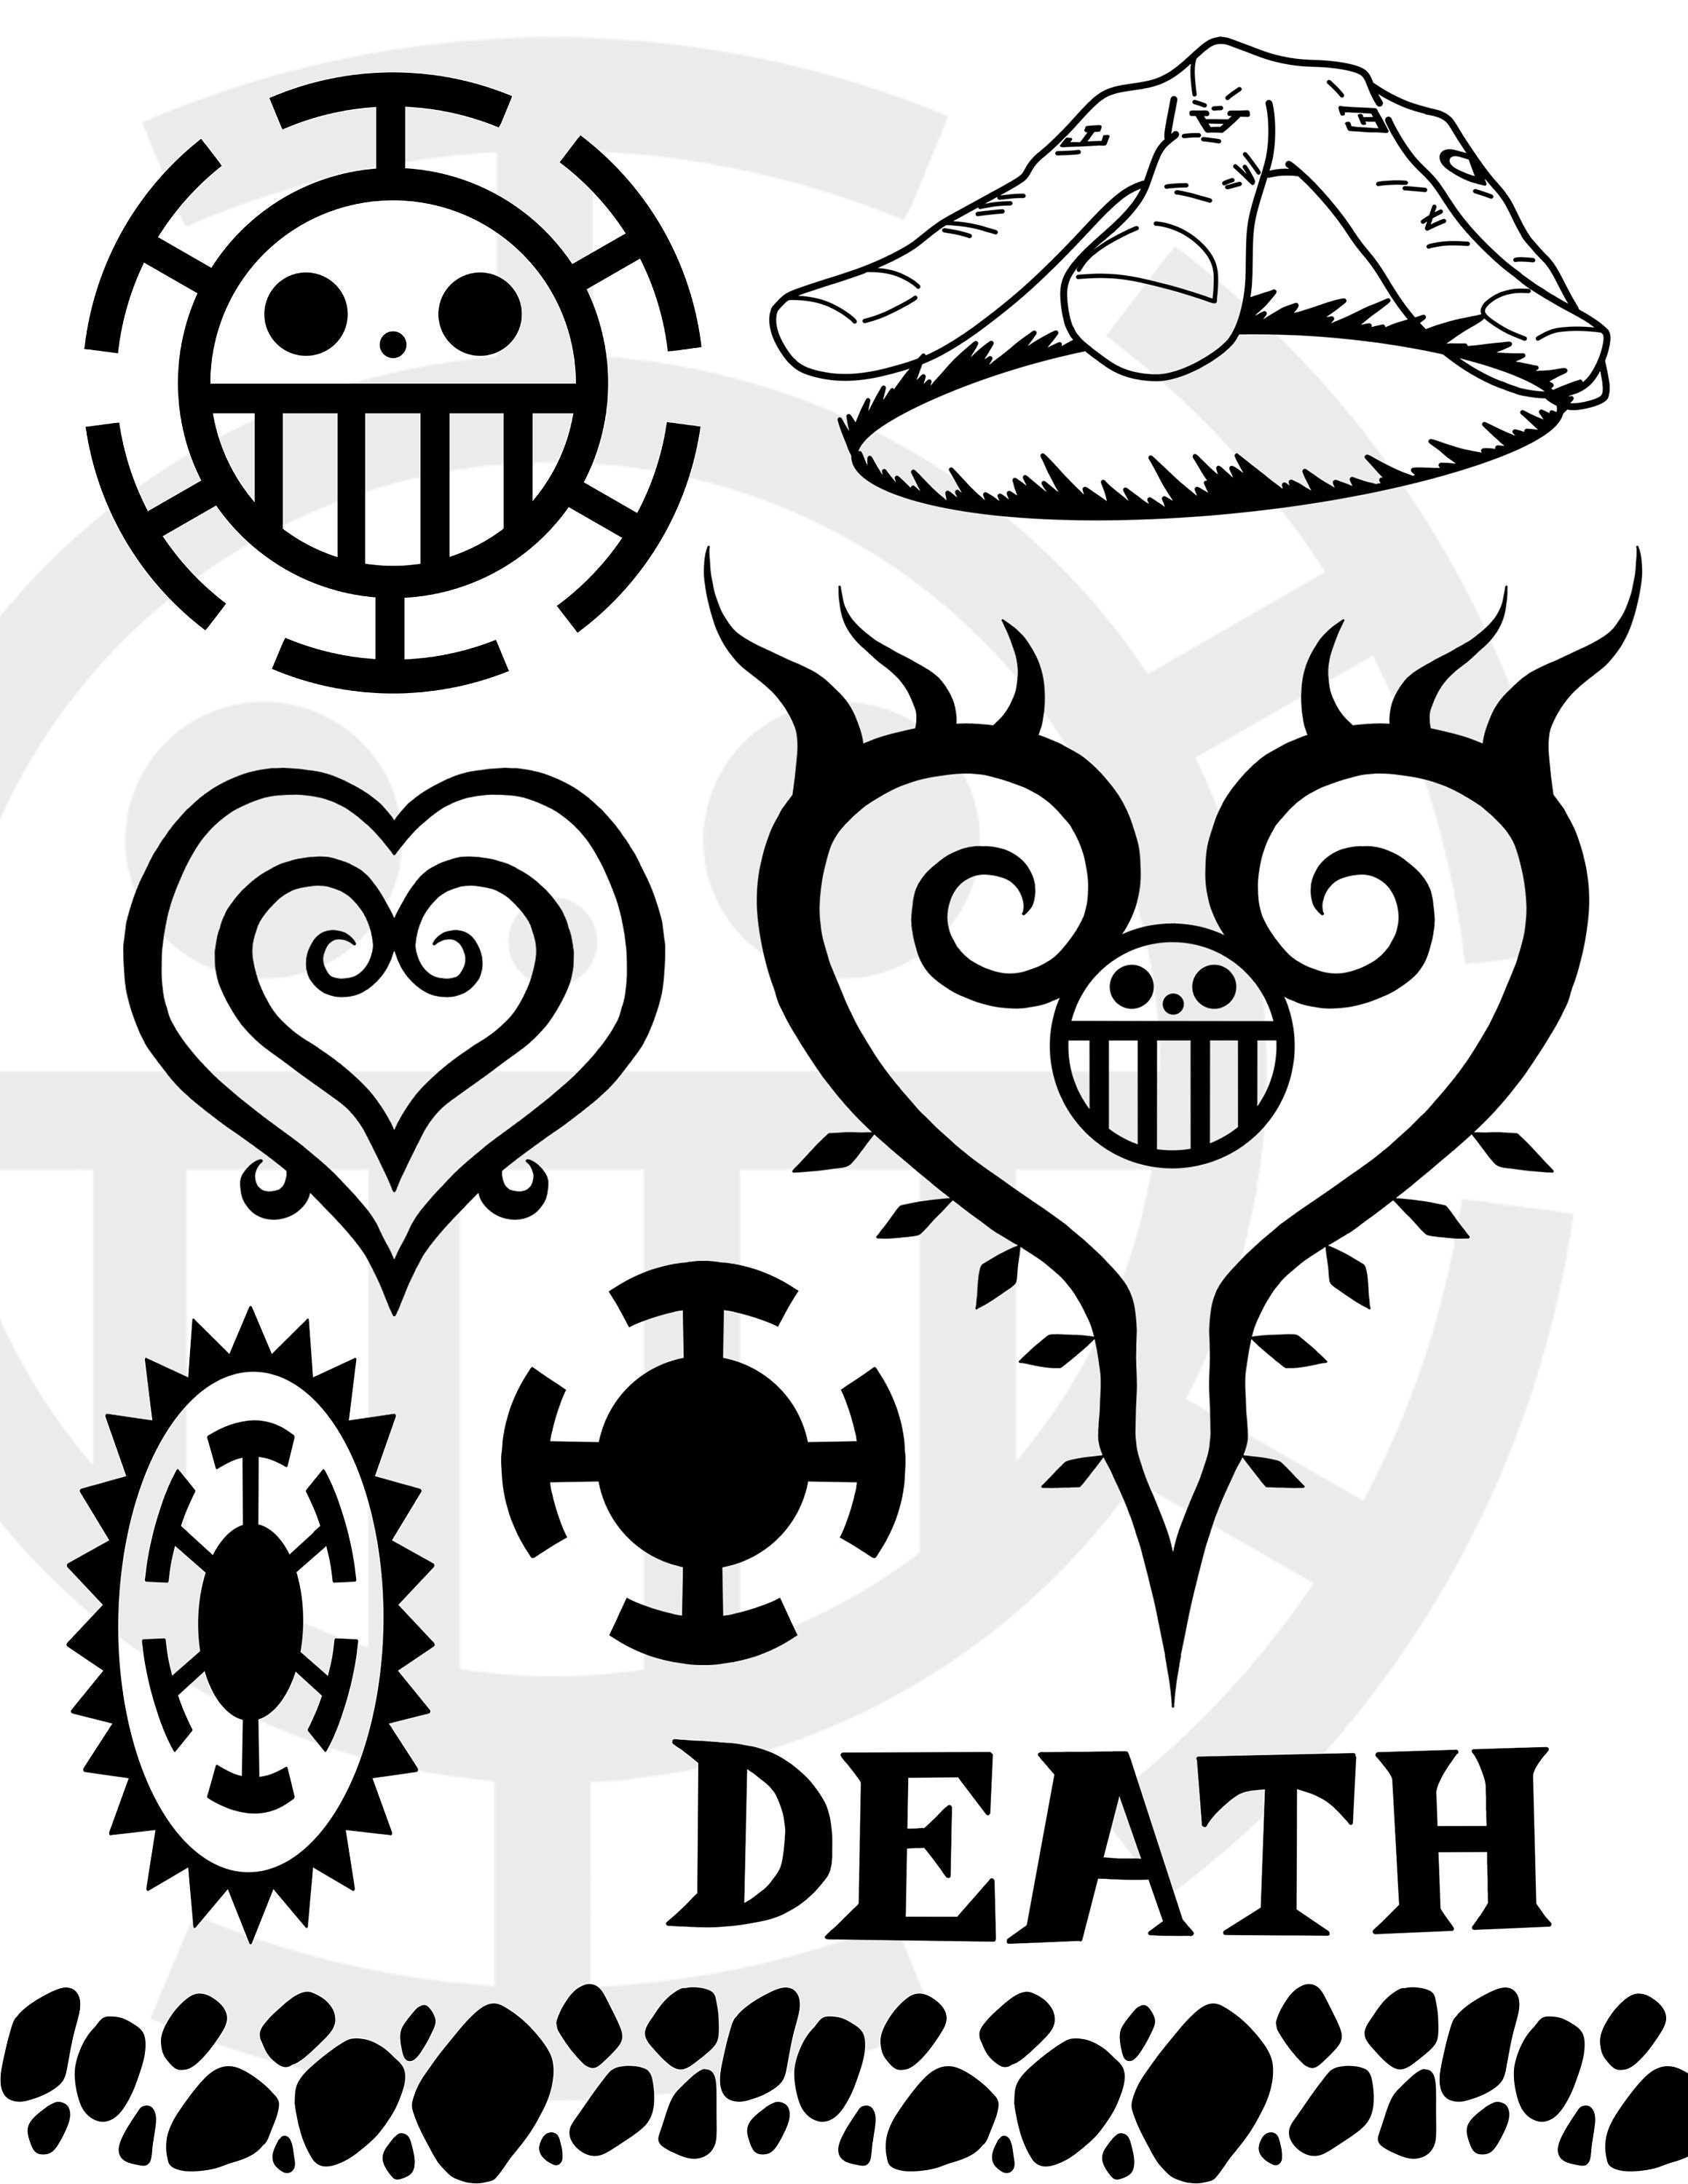 Final version of a tattoo idea I posted a couple days ago, colored and  greyscale versions : r/OnePiece